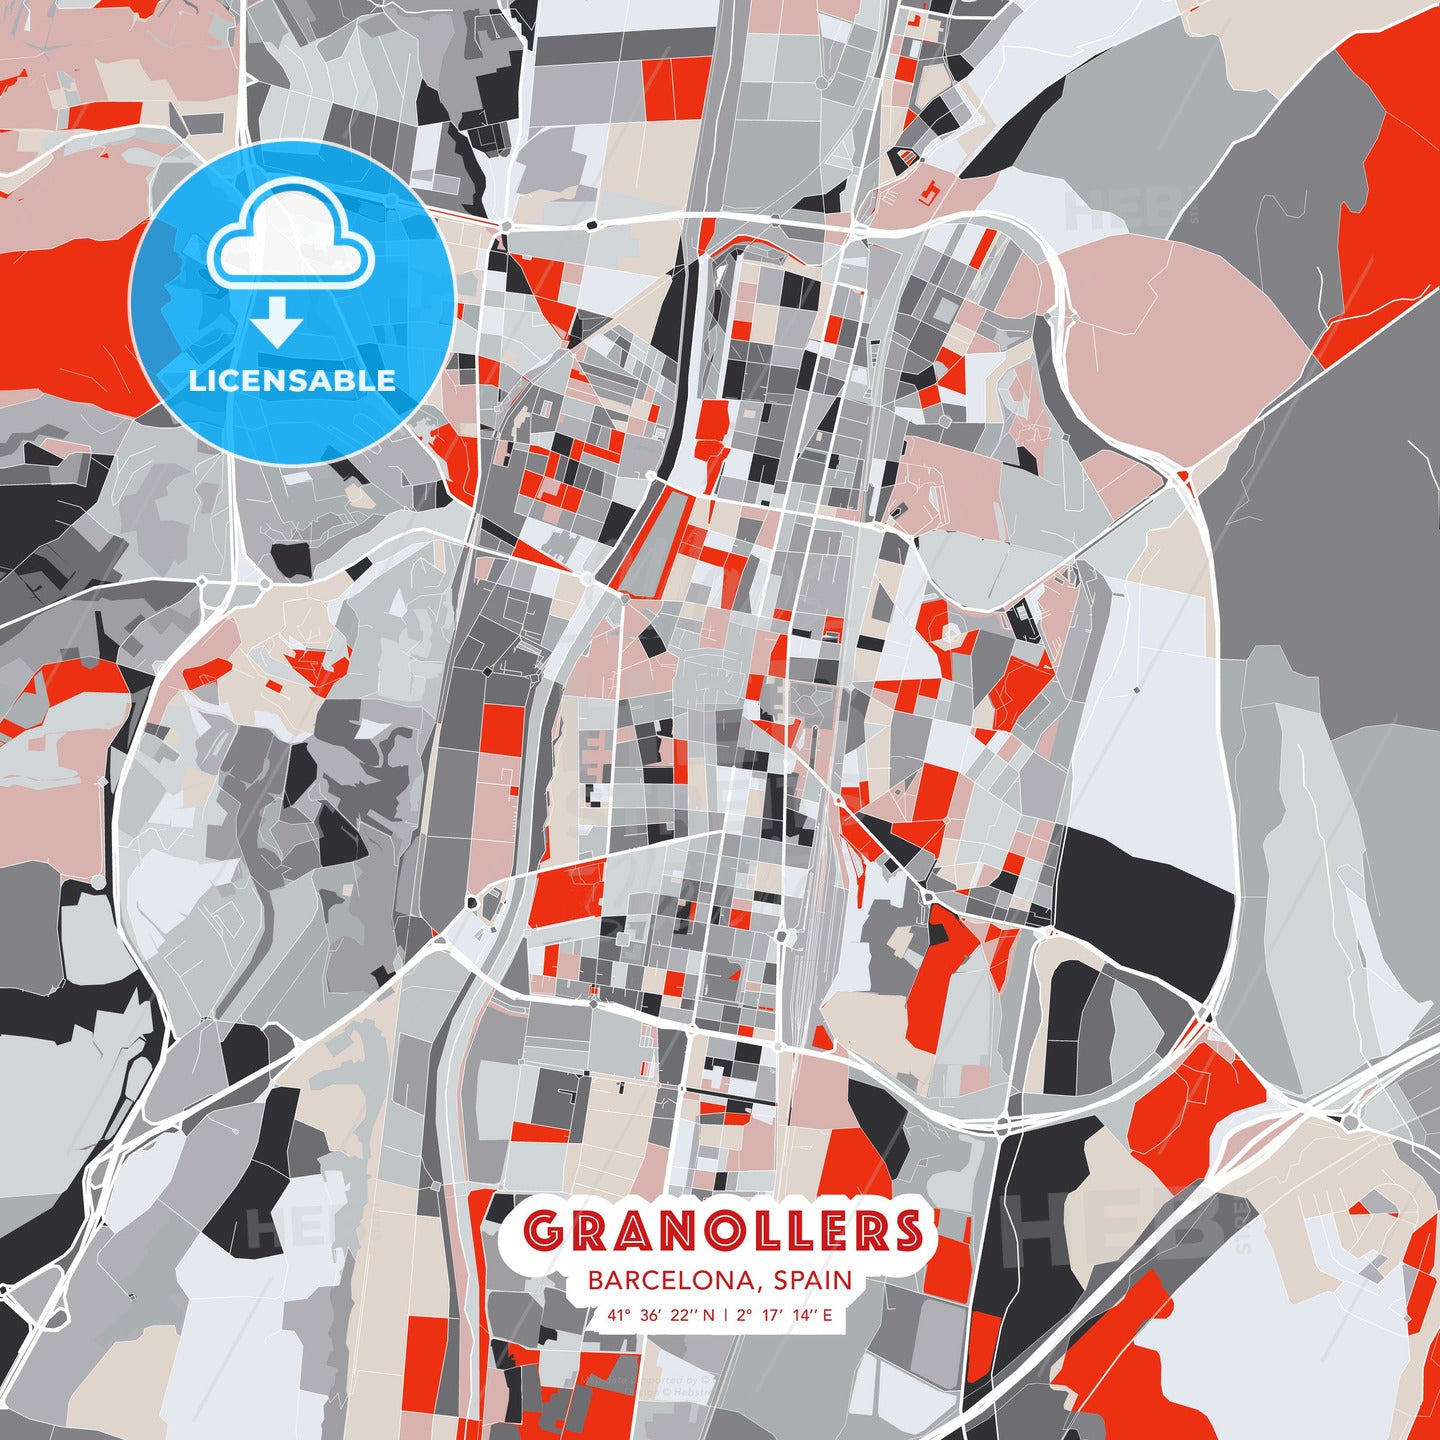 Granollers, Barcelona, Spain, modern map - HEBSTREITS Sketches